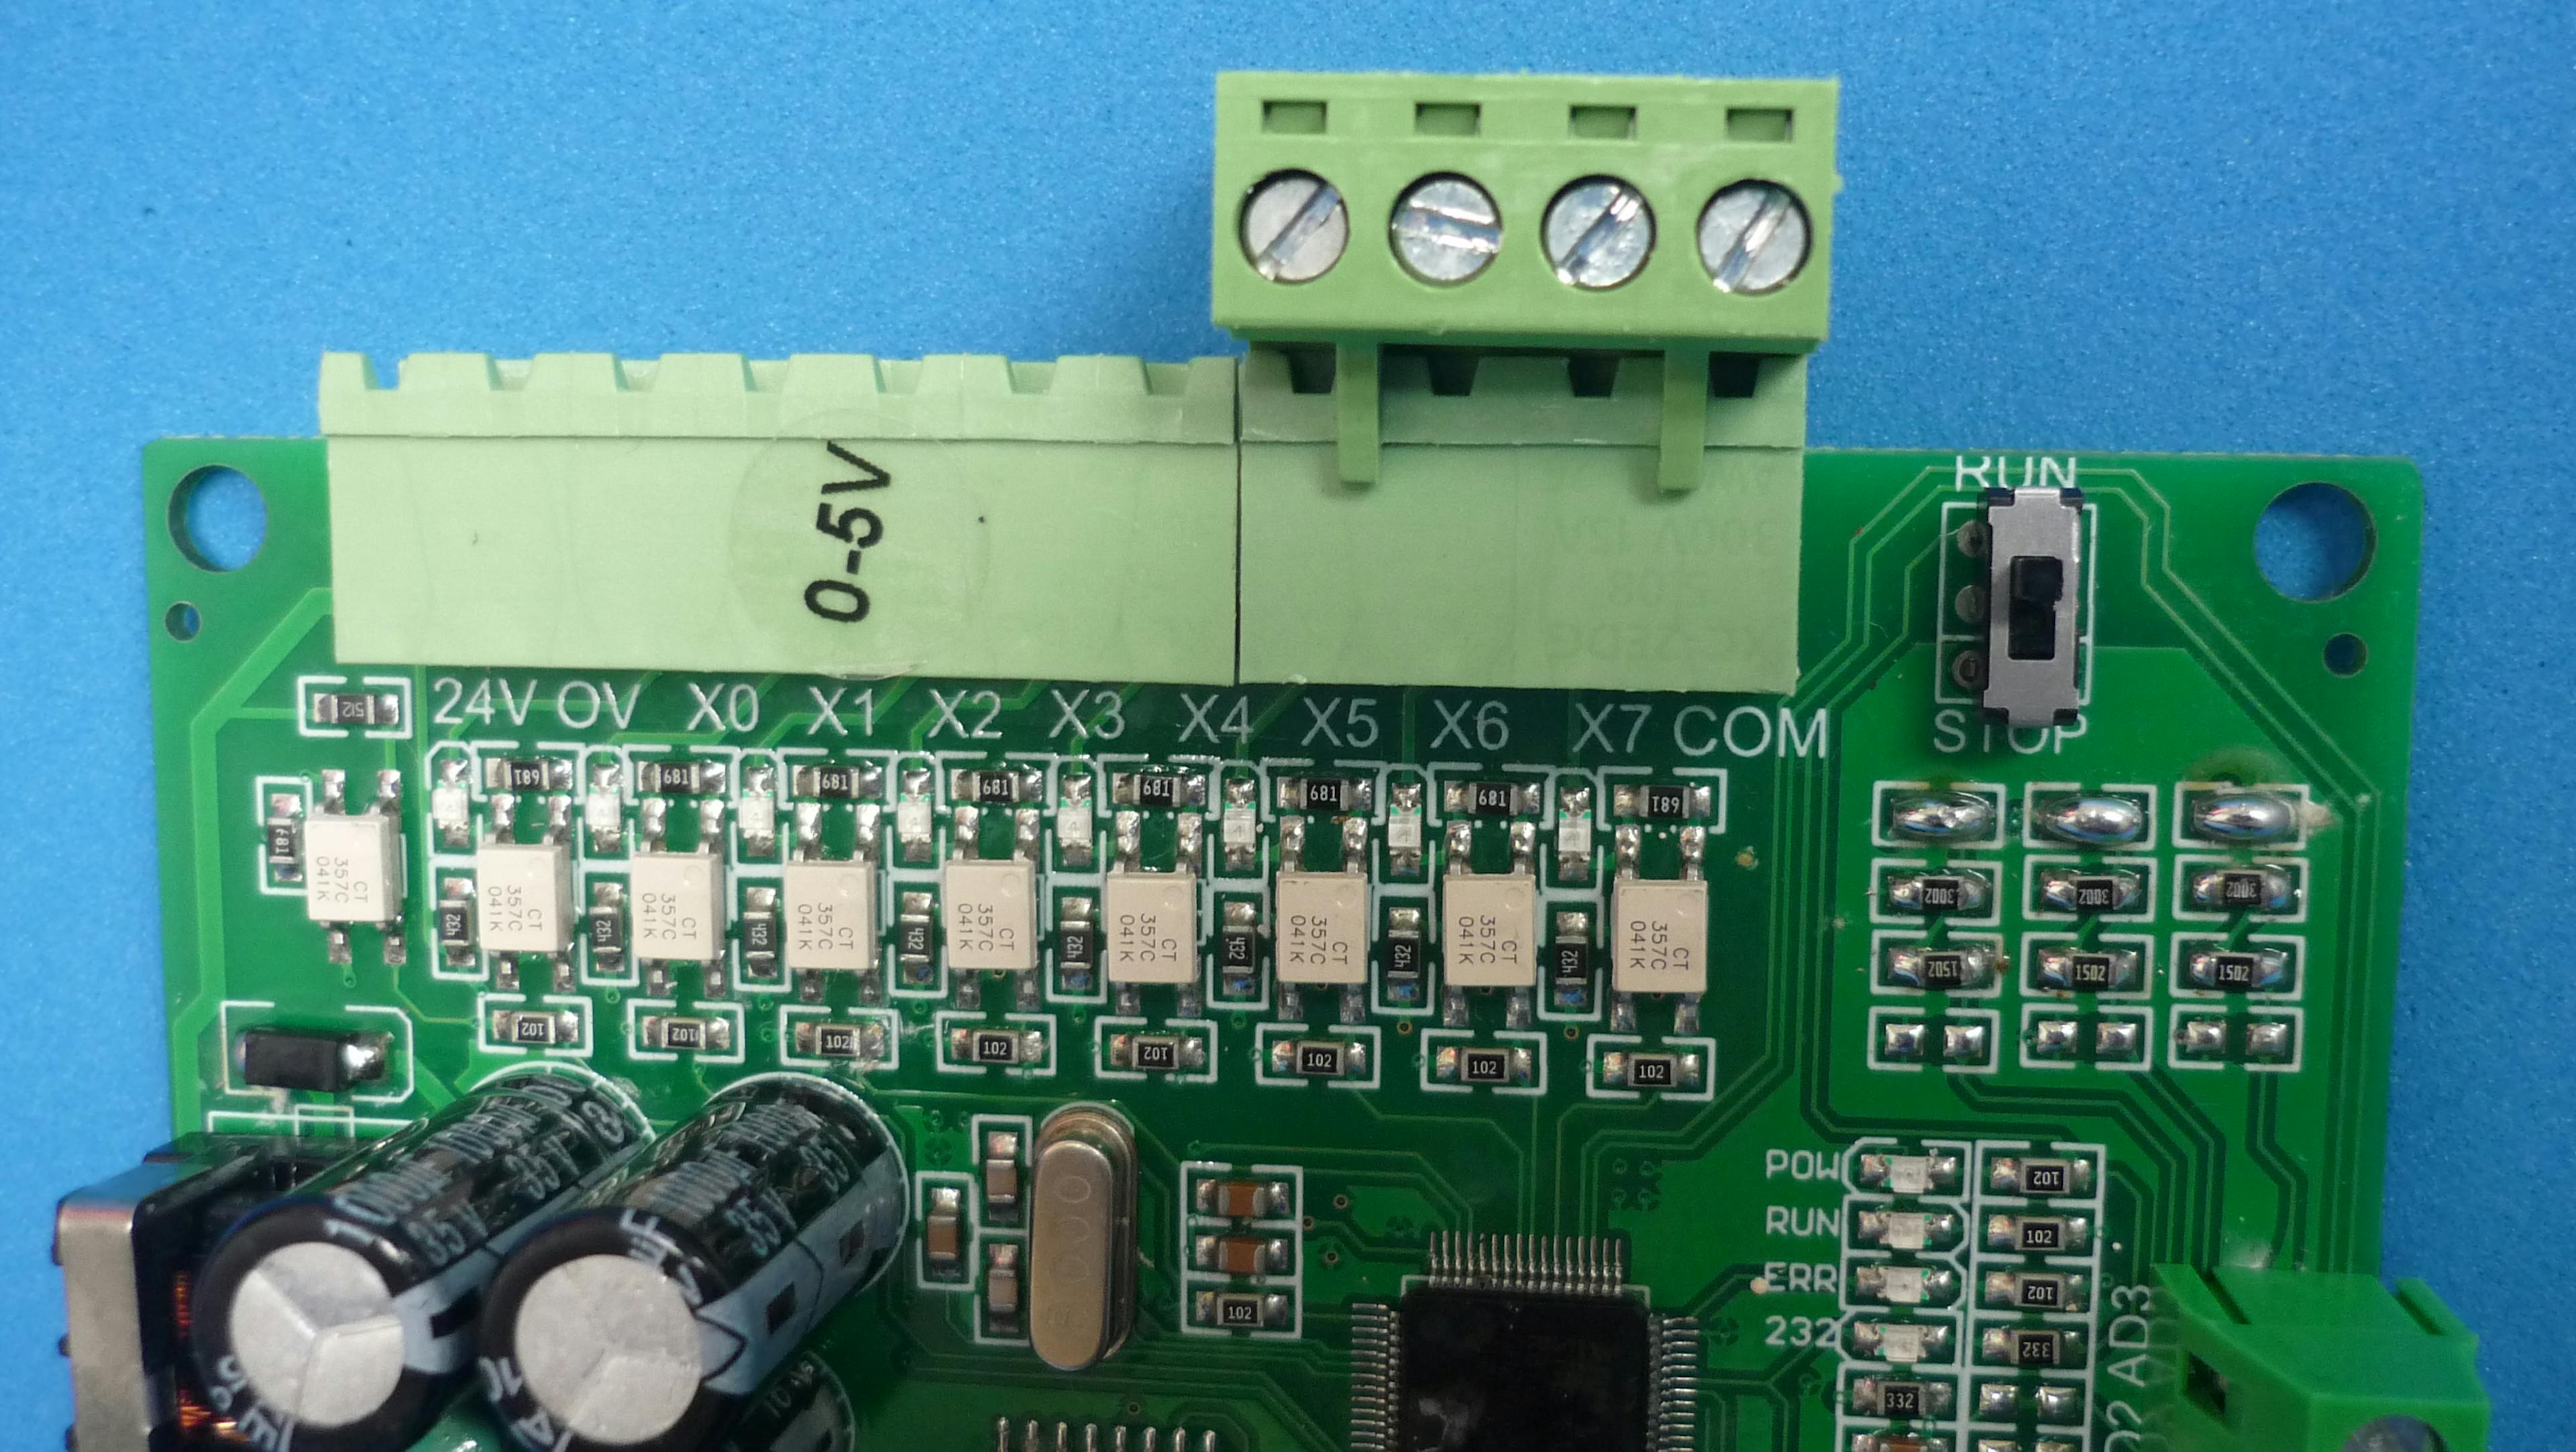 Microcontroller I/O pins connected to LED indicators and switch identified